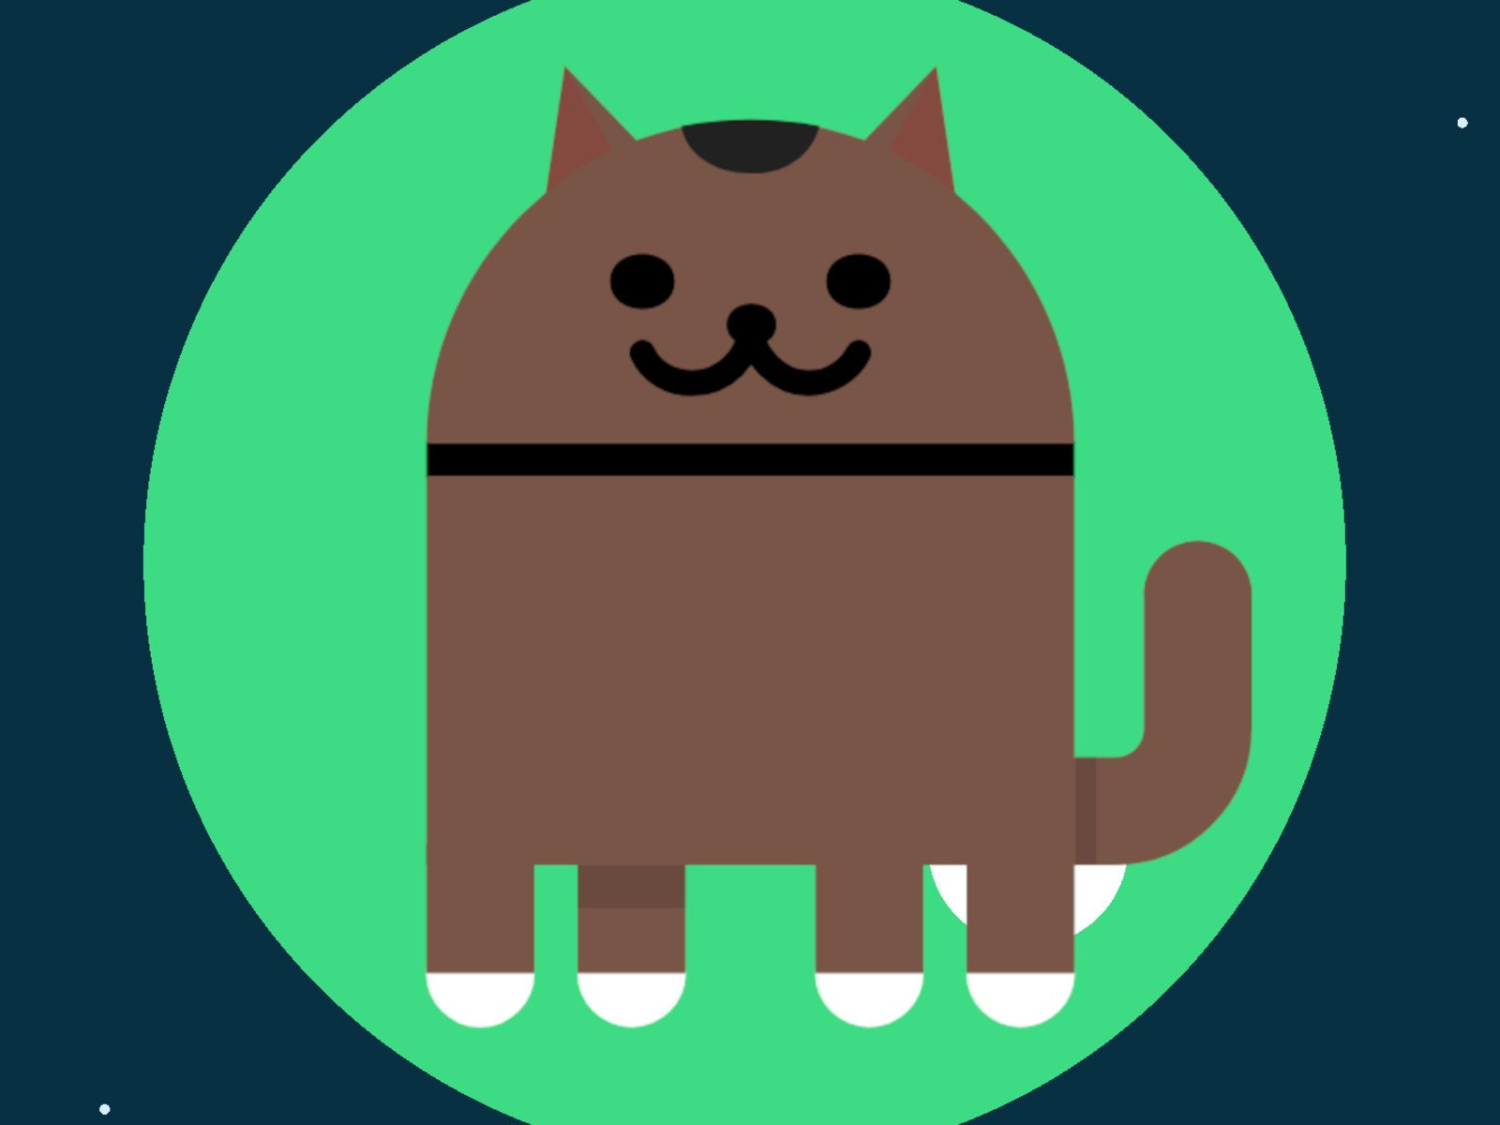 android-11-easter-egg the cat emoji